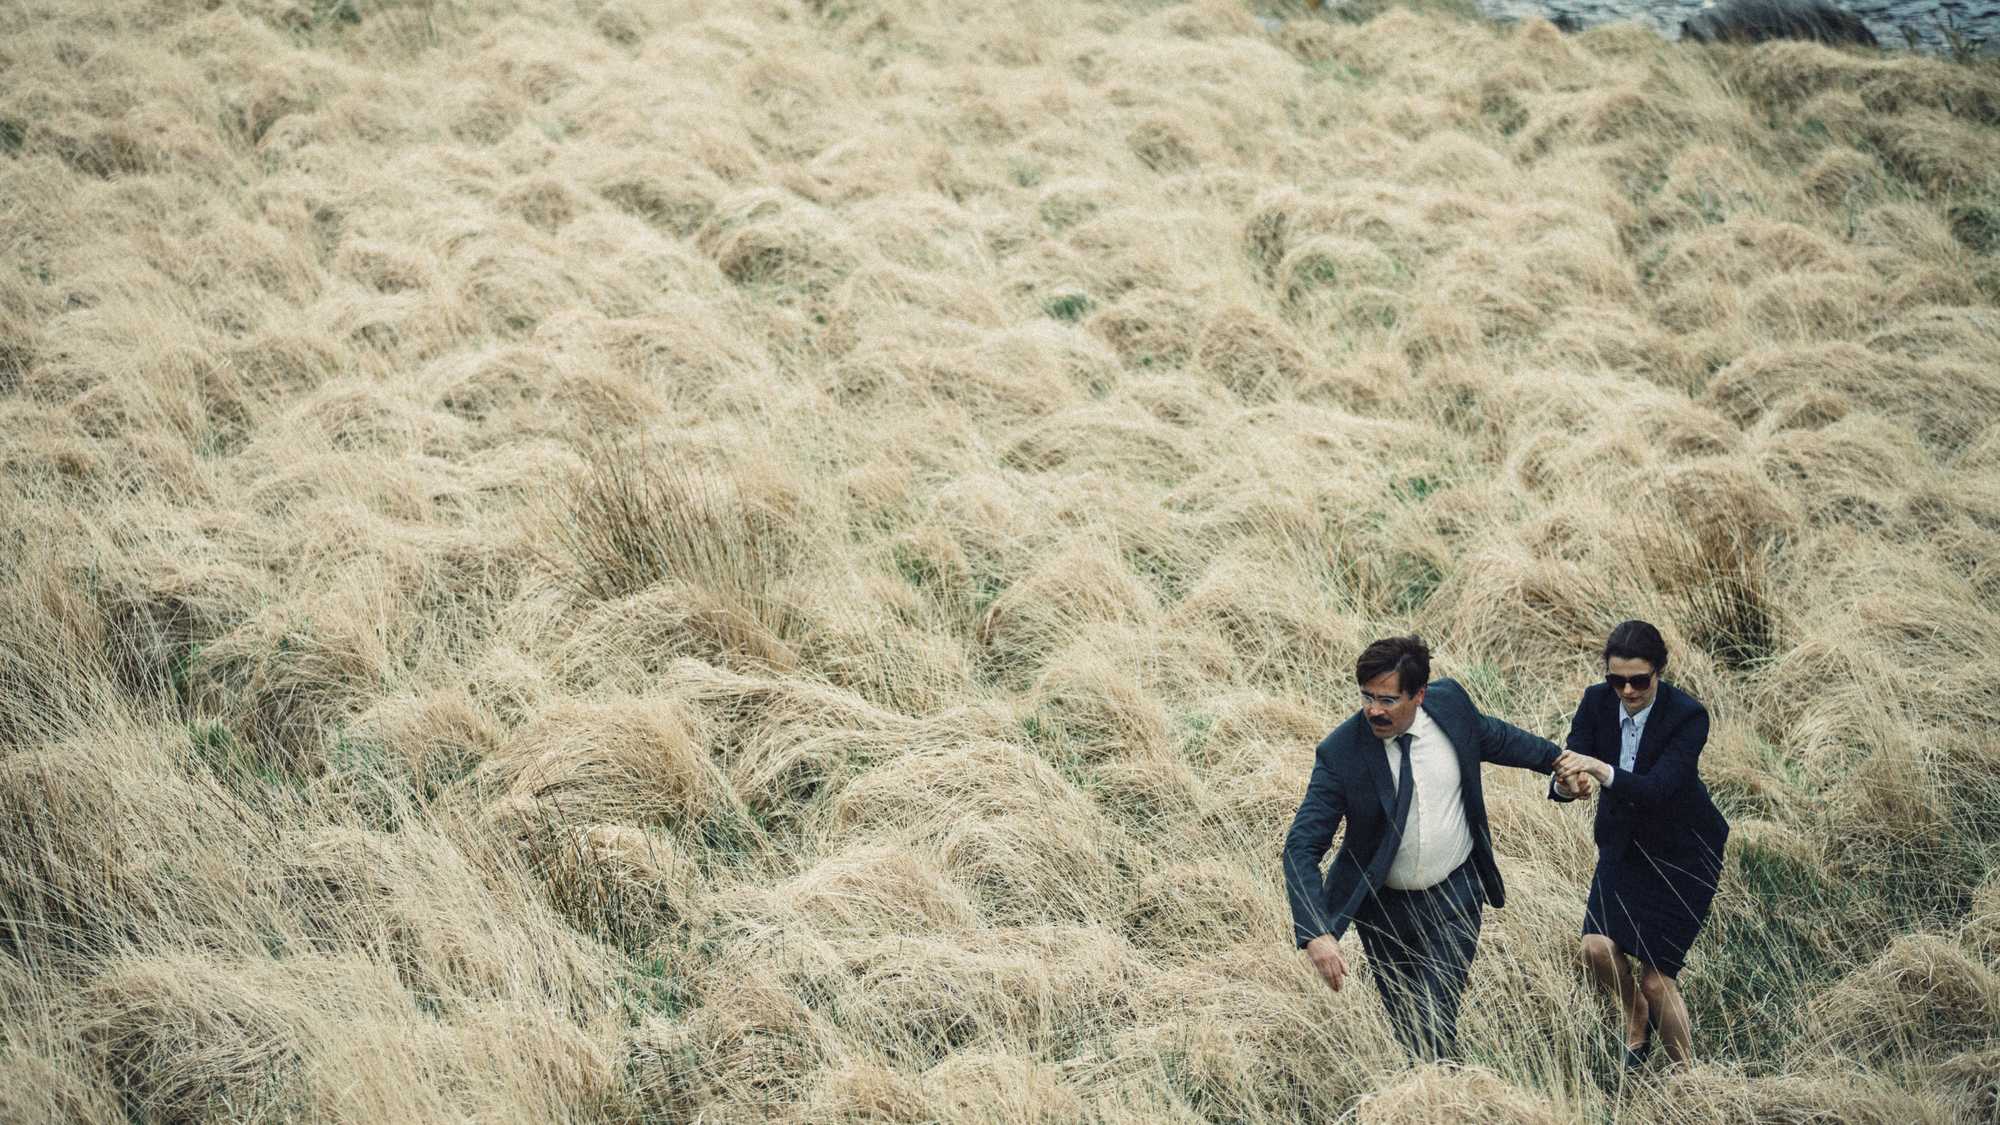 The Lobster (image 2)